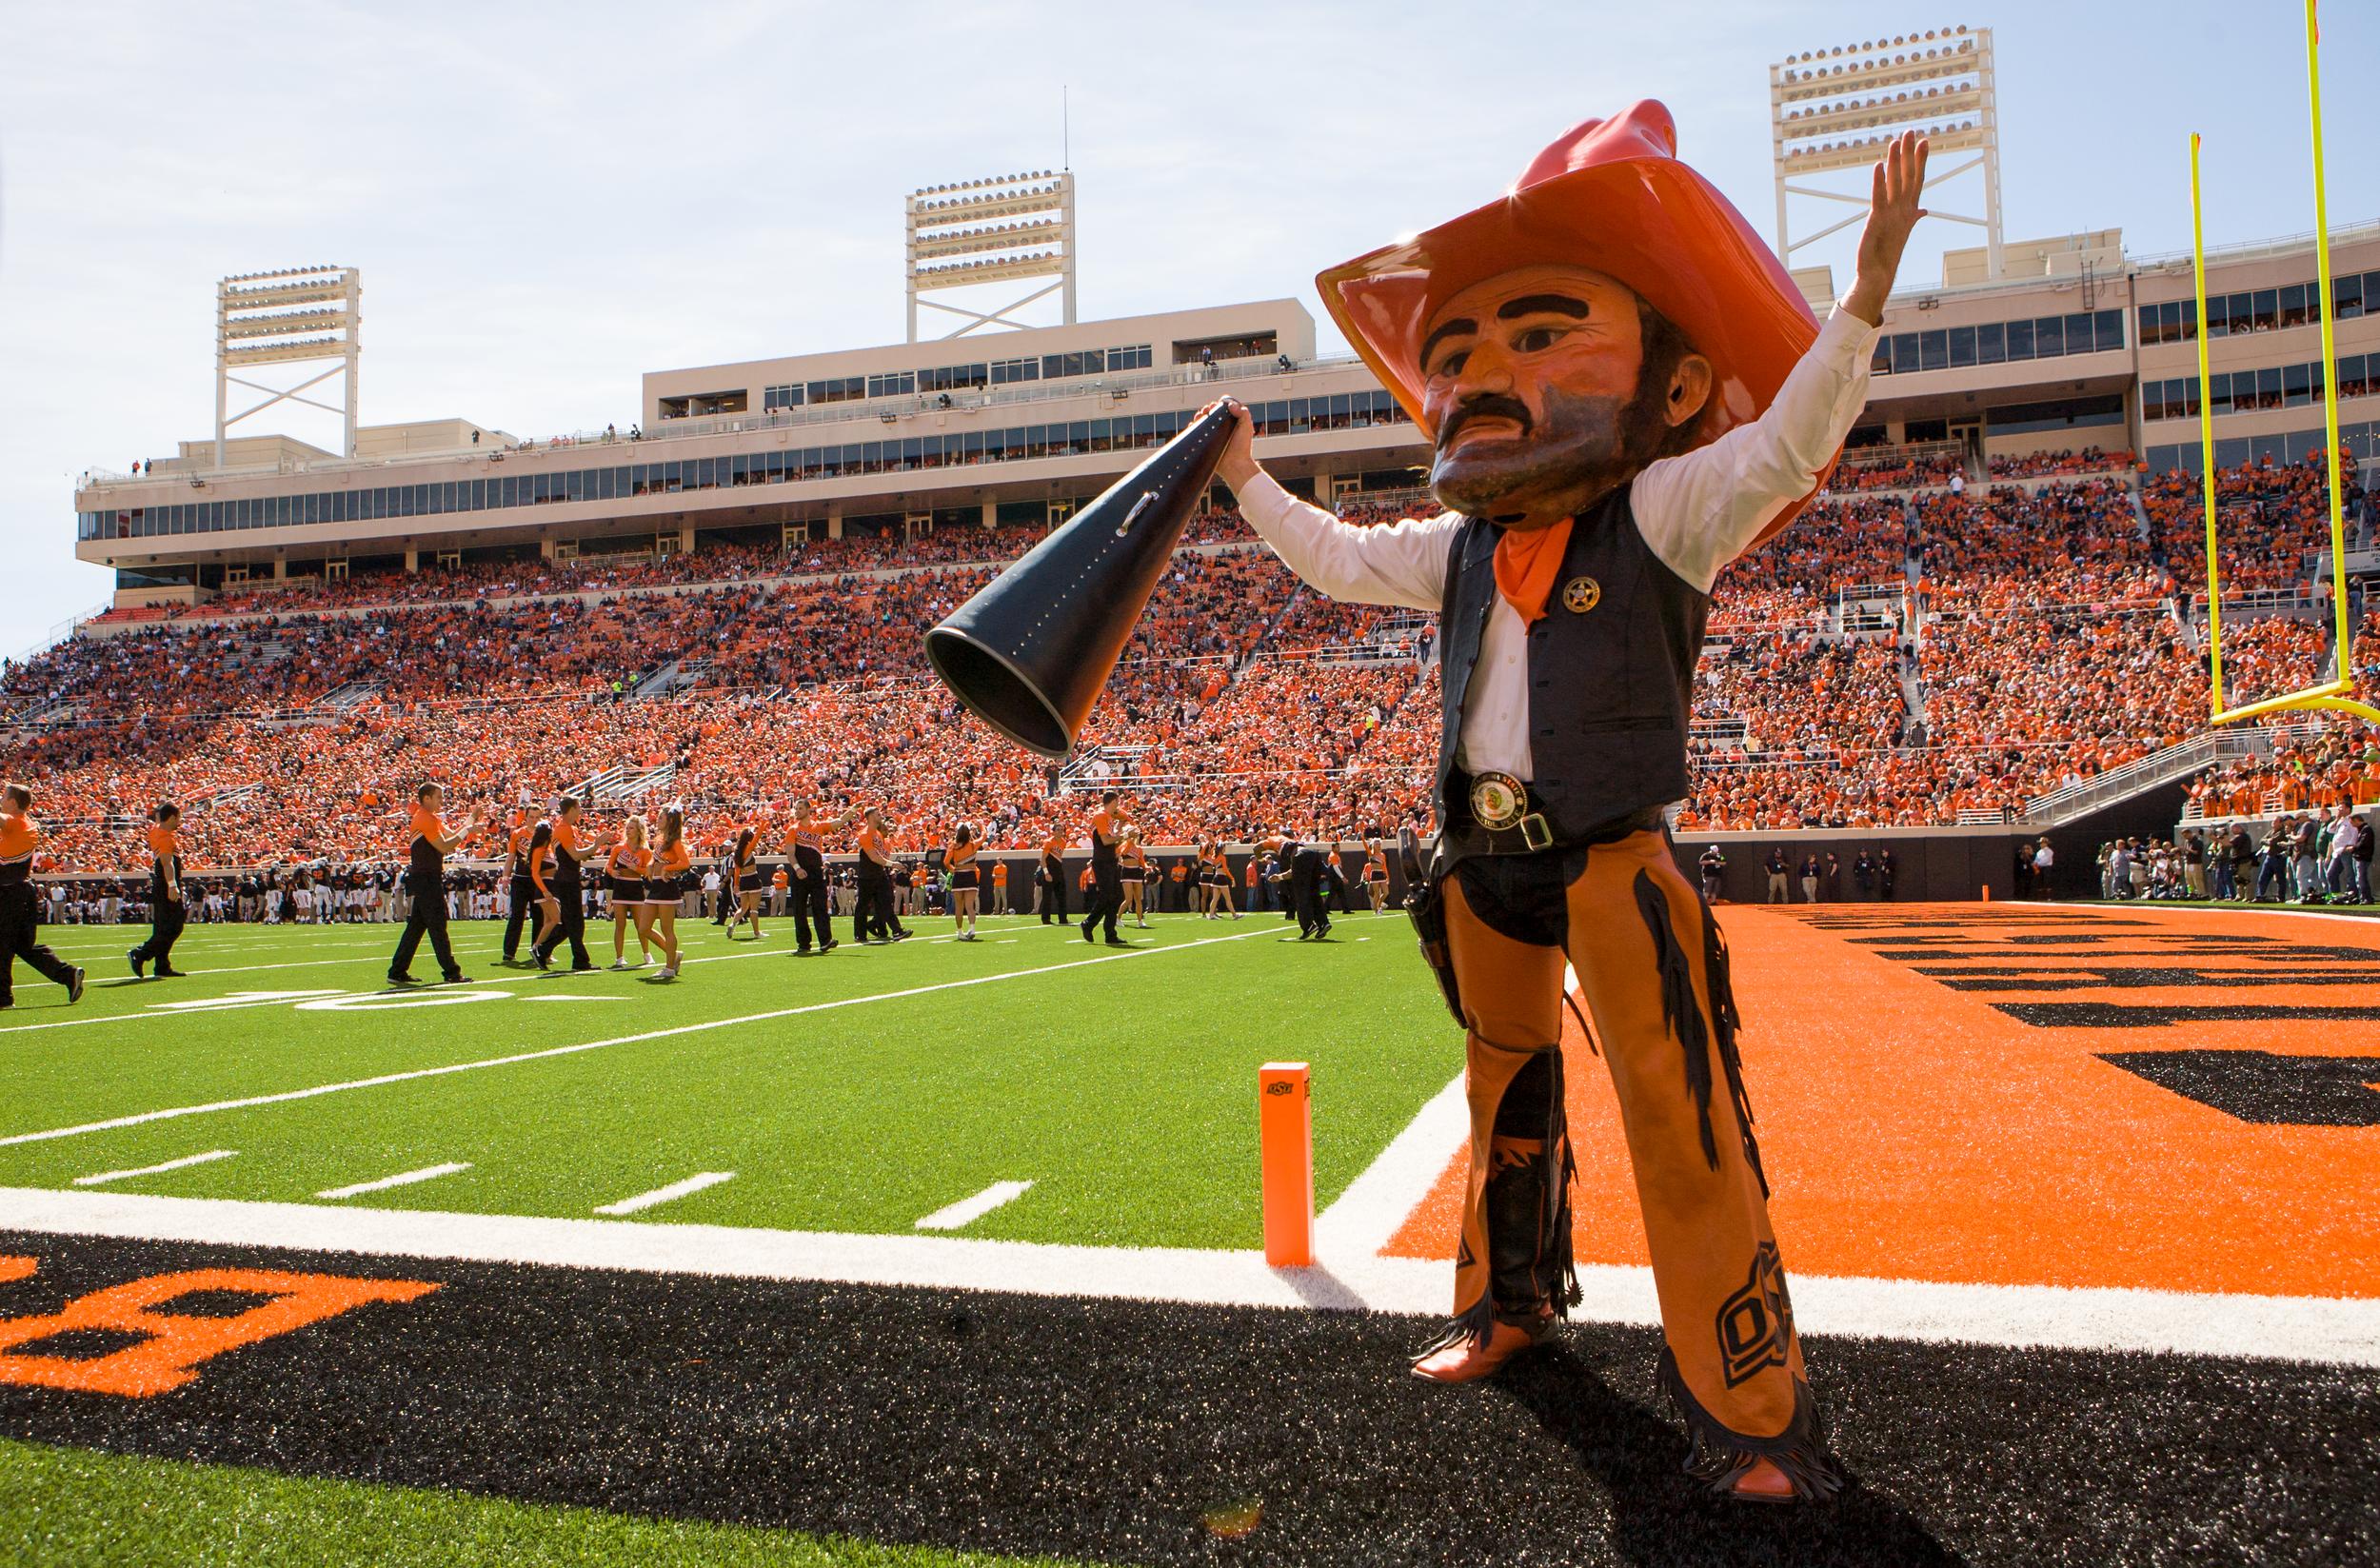 Pistol Pete stands in Boone Pickens Stadium raising one empty hand and a megaphone in the other hand.